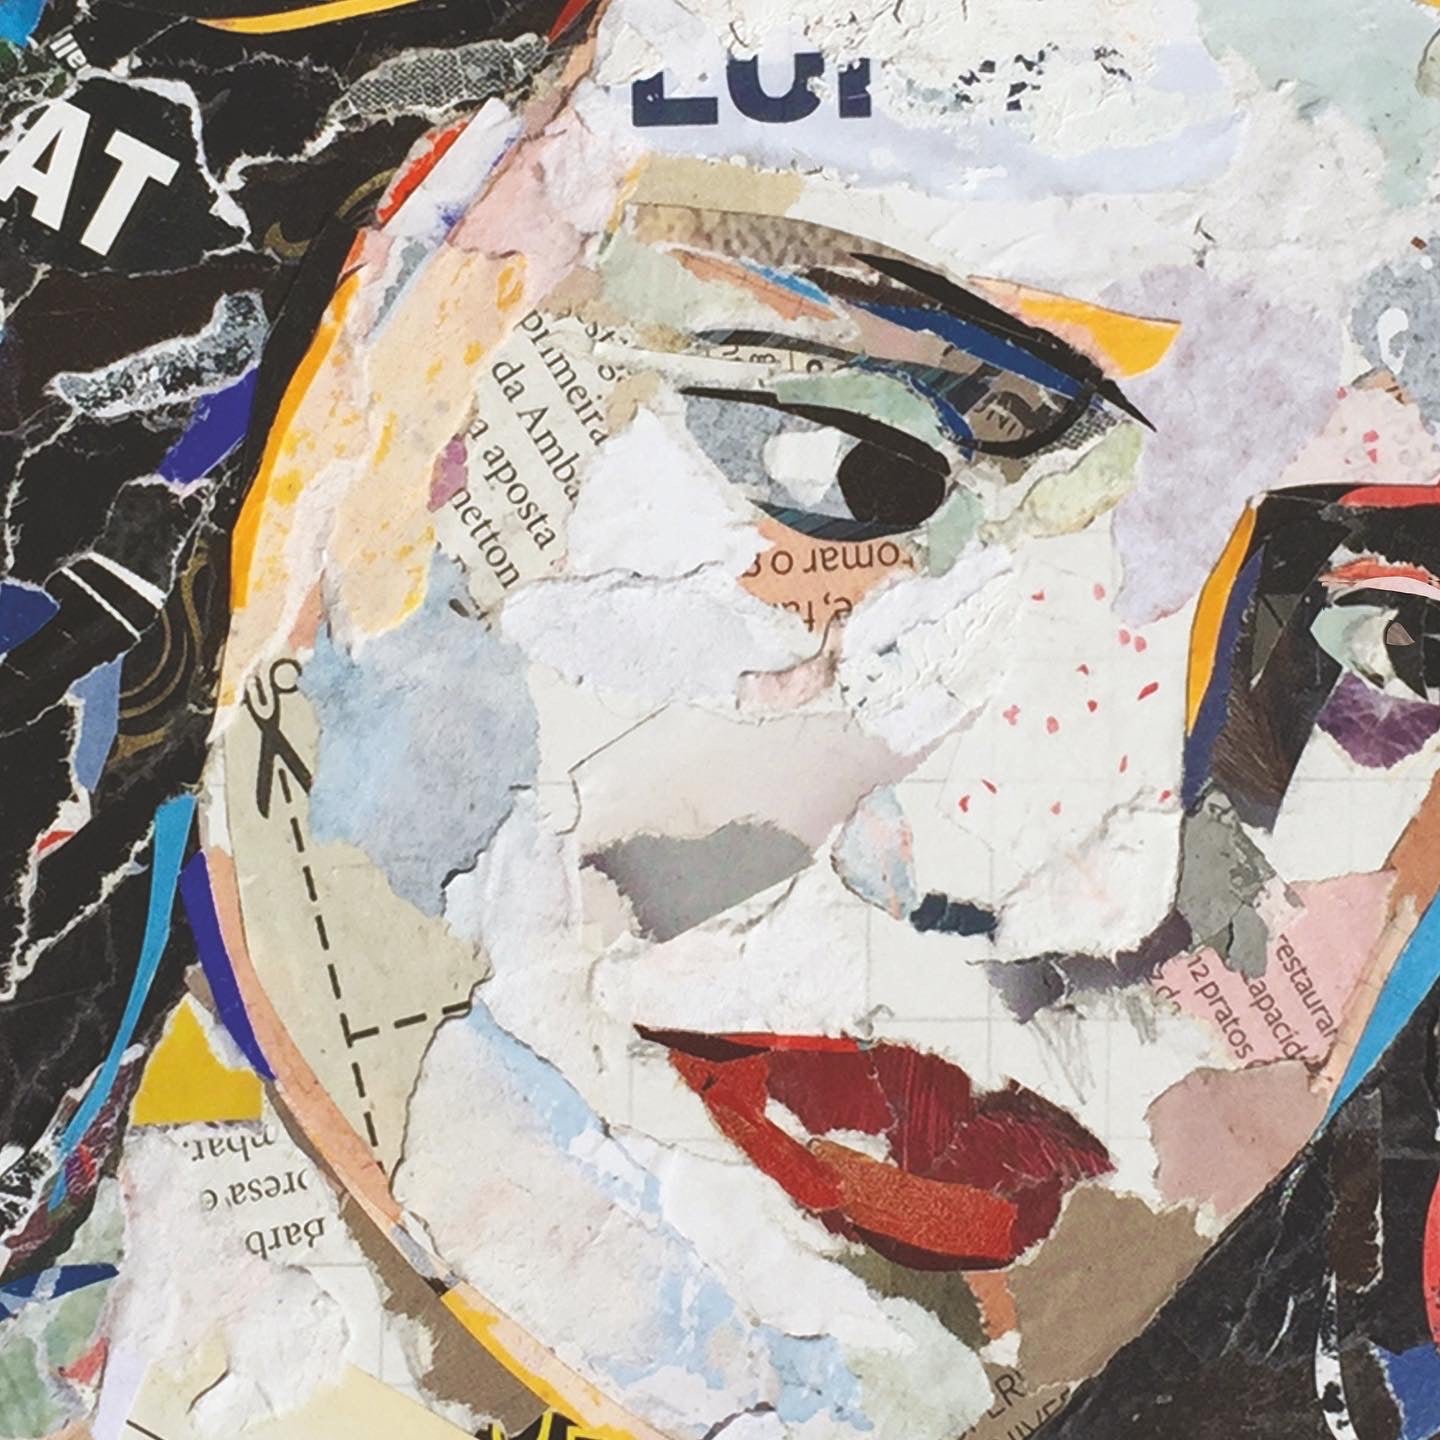 AMÁLIA RODRIGUES – Collage Art by Philippe Patricio